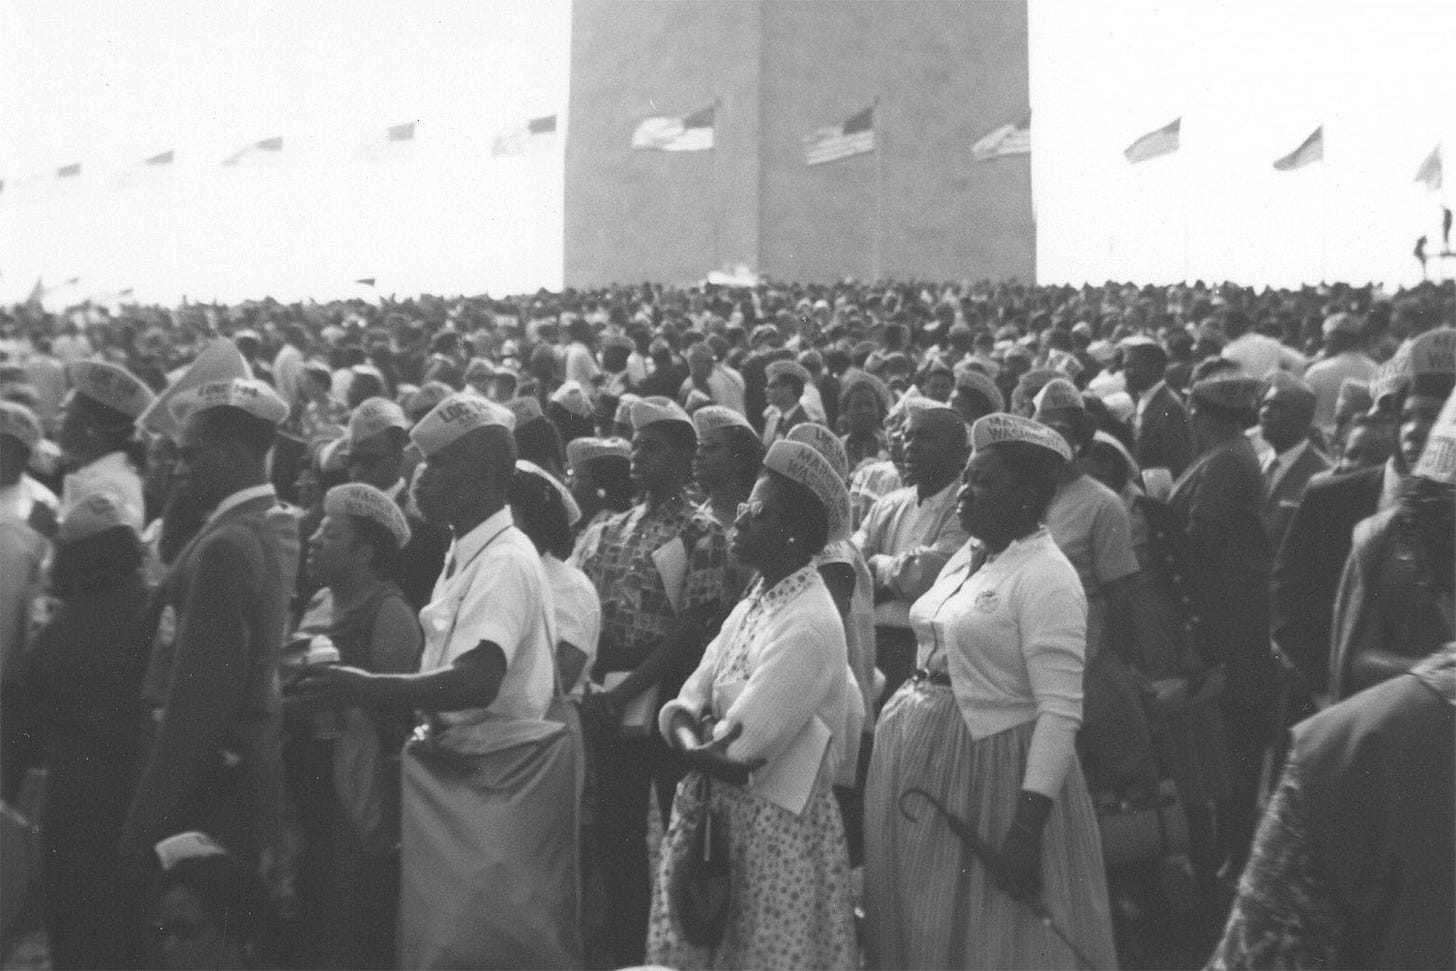 A black-and-white photo of the thousands gathered at the march watching a speaker against a backdrop of American flags. 